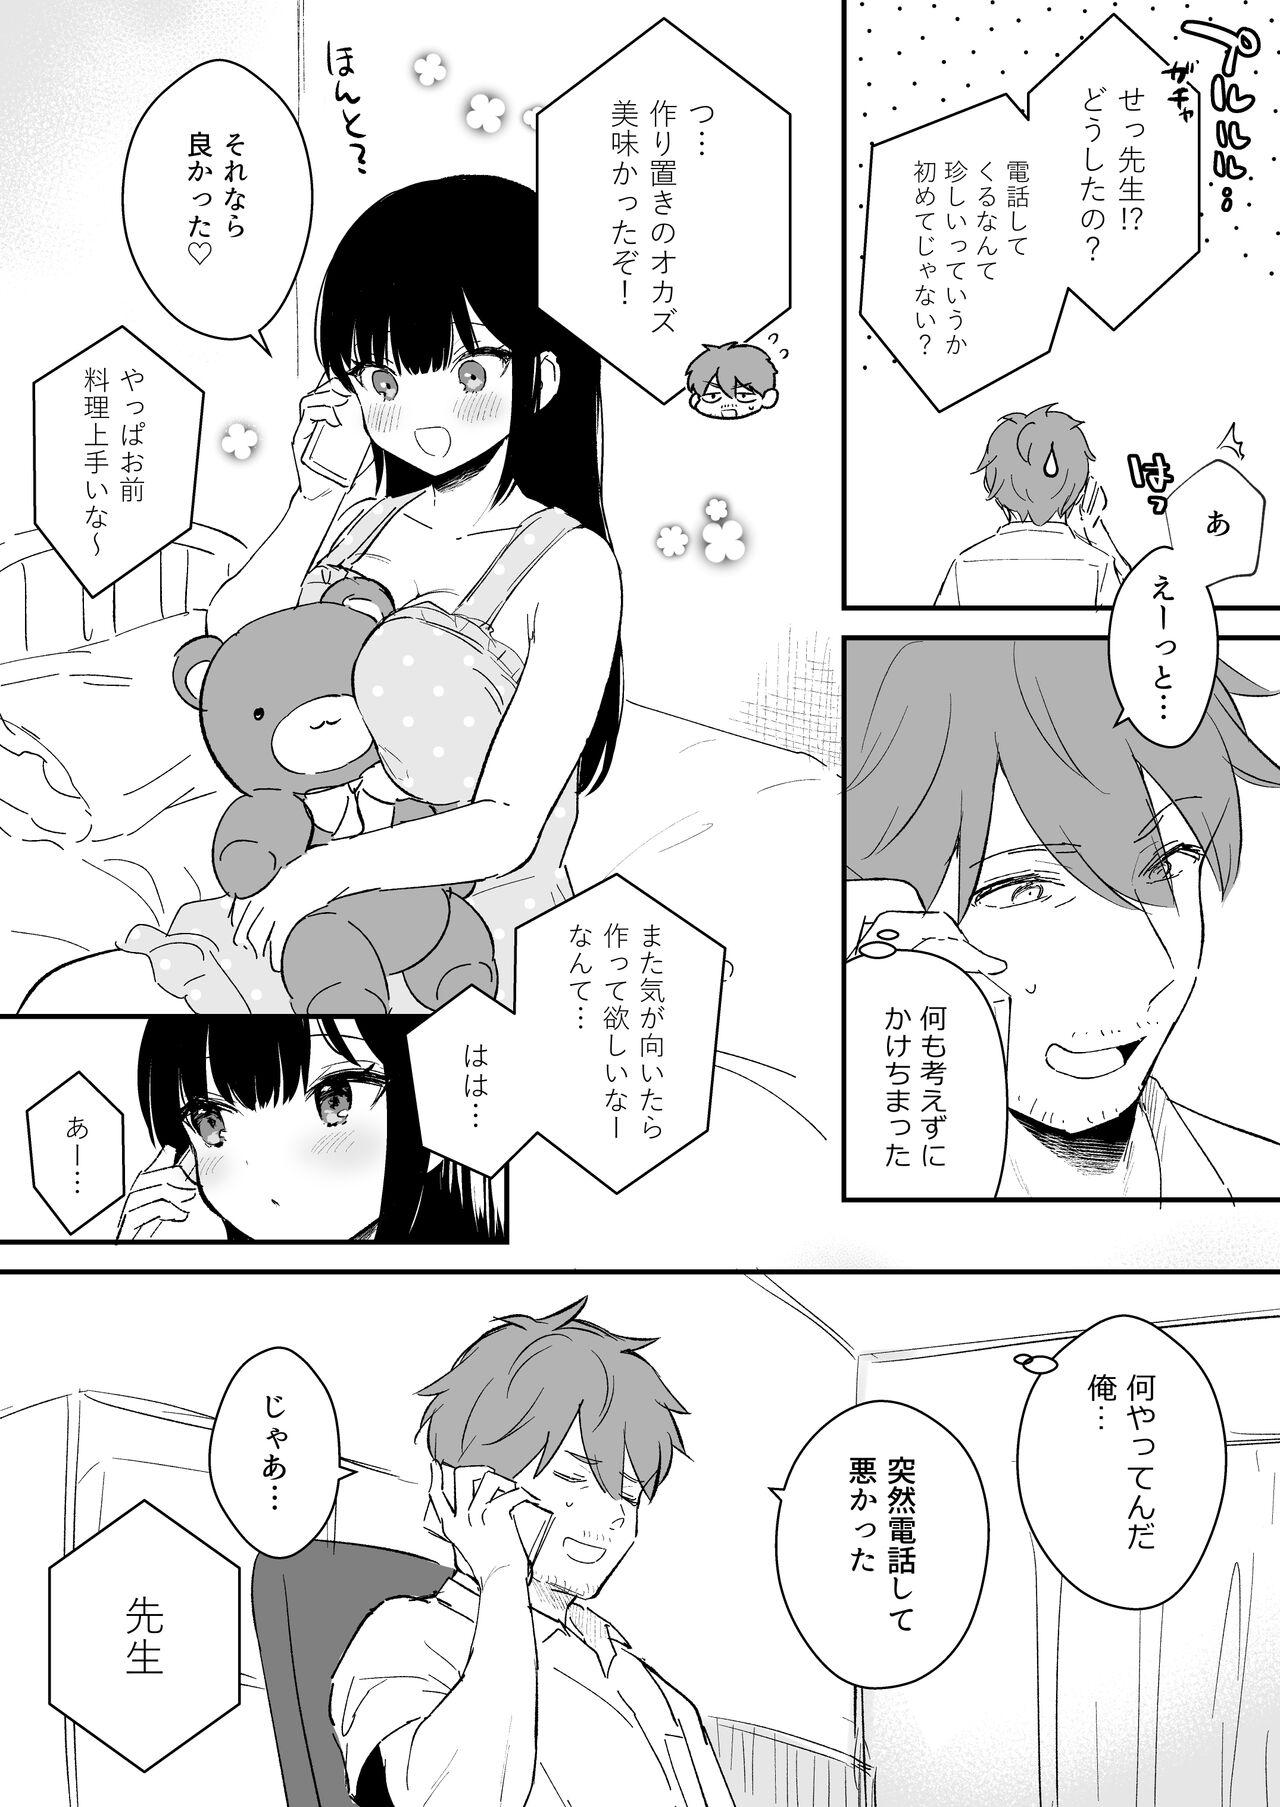 Girl Fuck 『おしかけ彼女のおままごと』の小ネタ没ネタ漫画 Sixtynine - Page 16